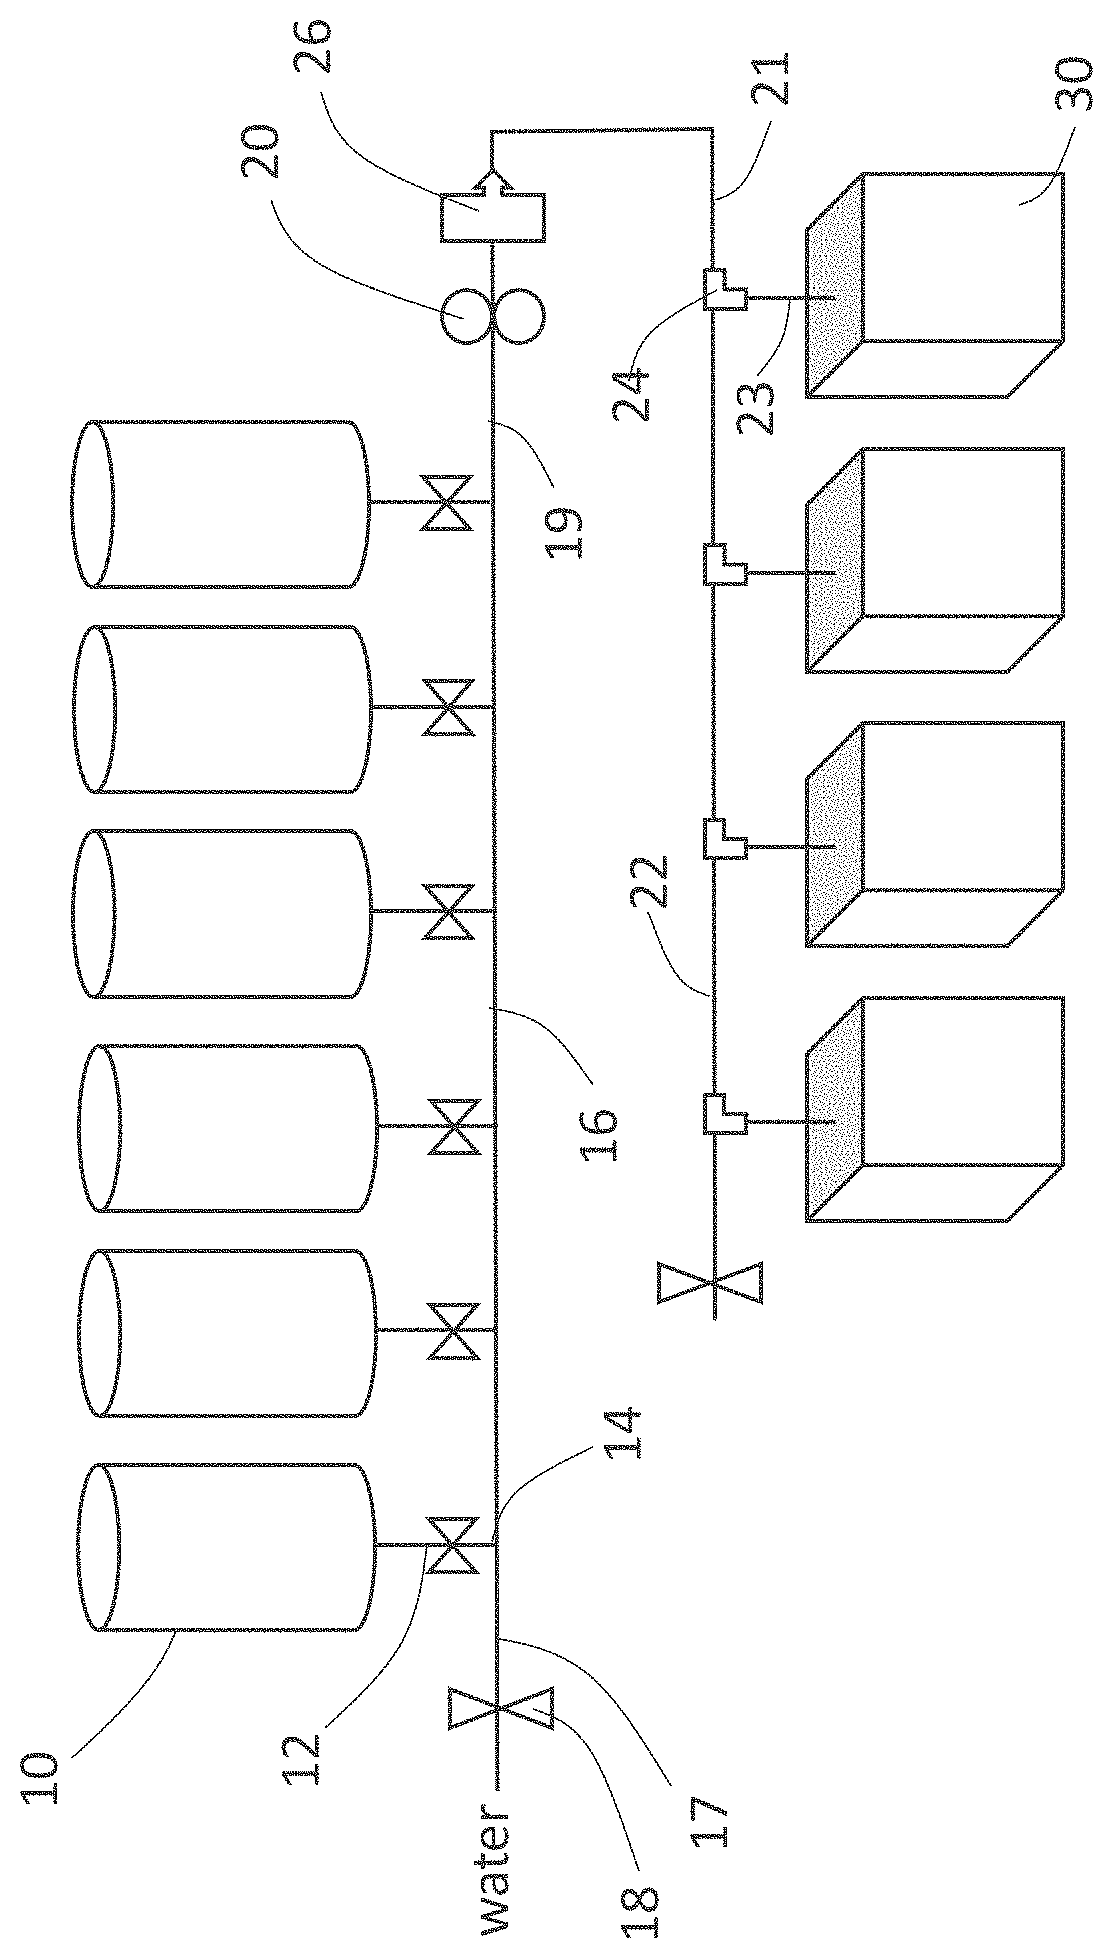 Methods of laundering stitchbonded nonwoven towels using a soil release polymer